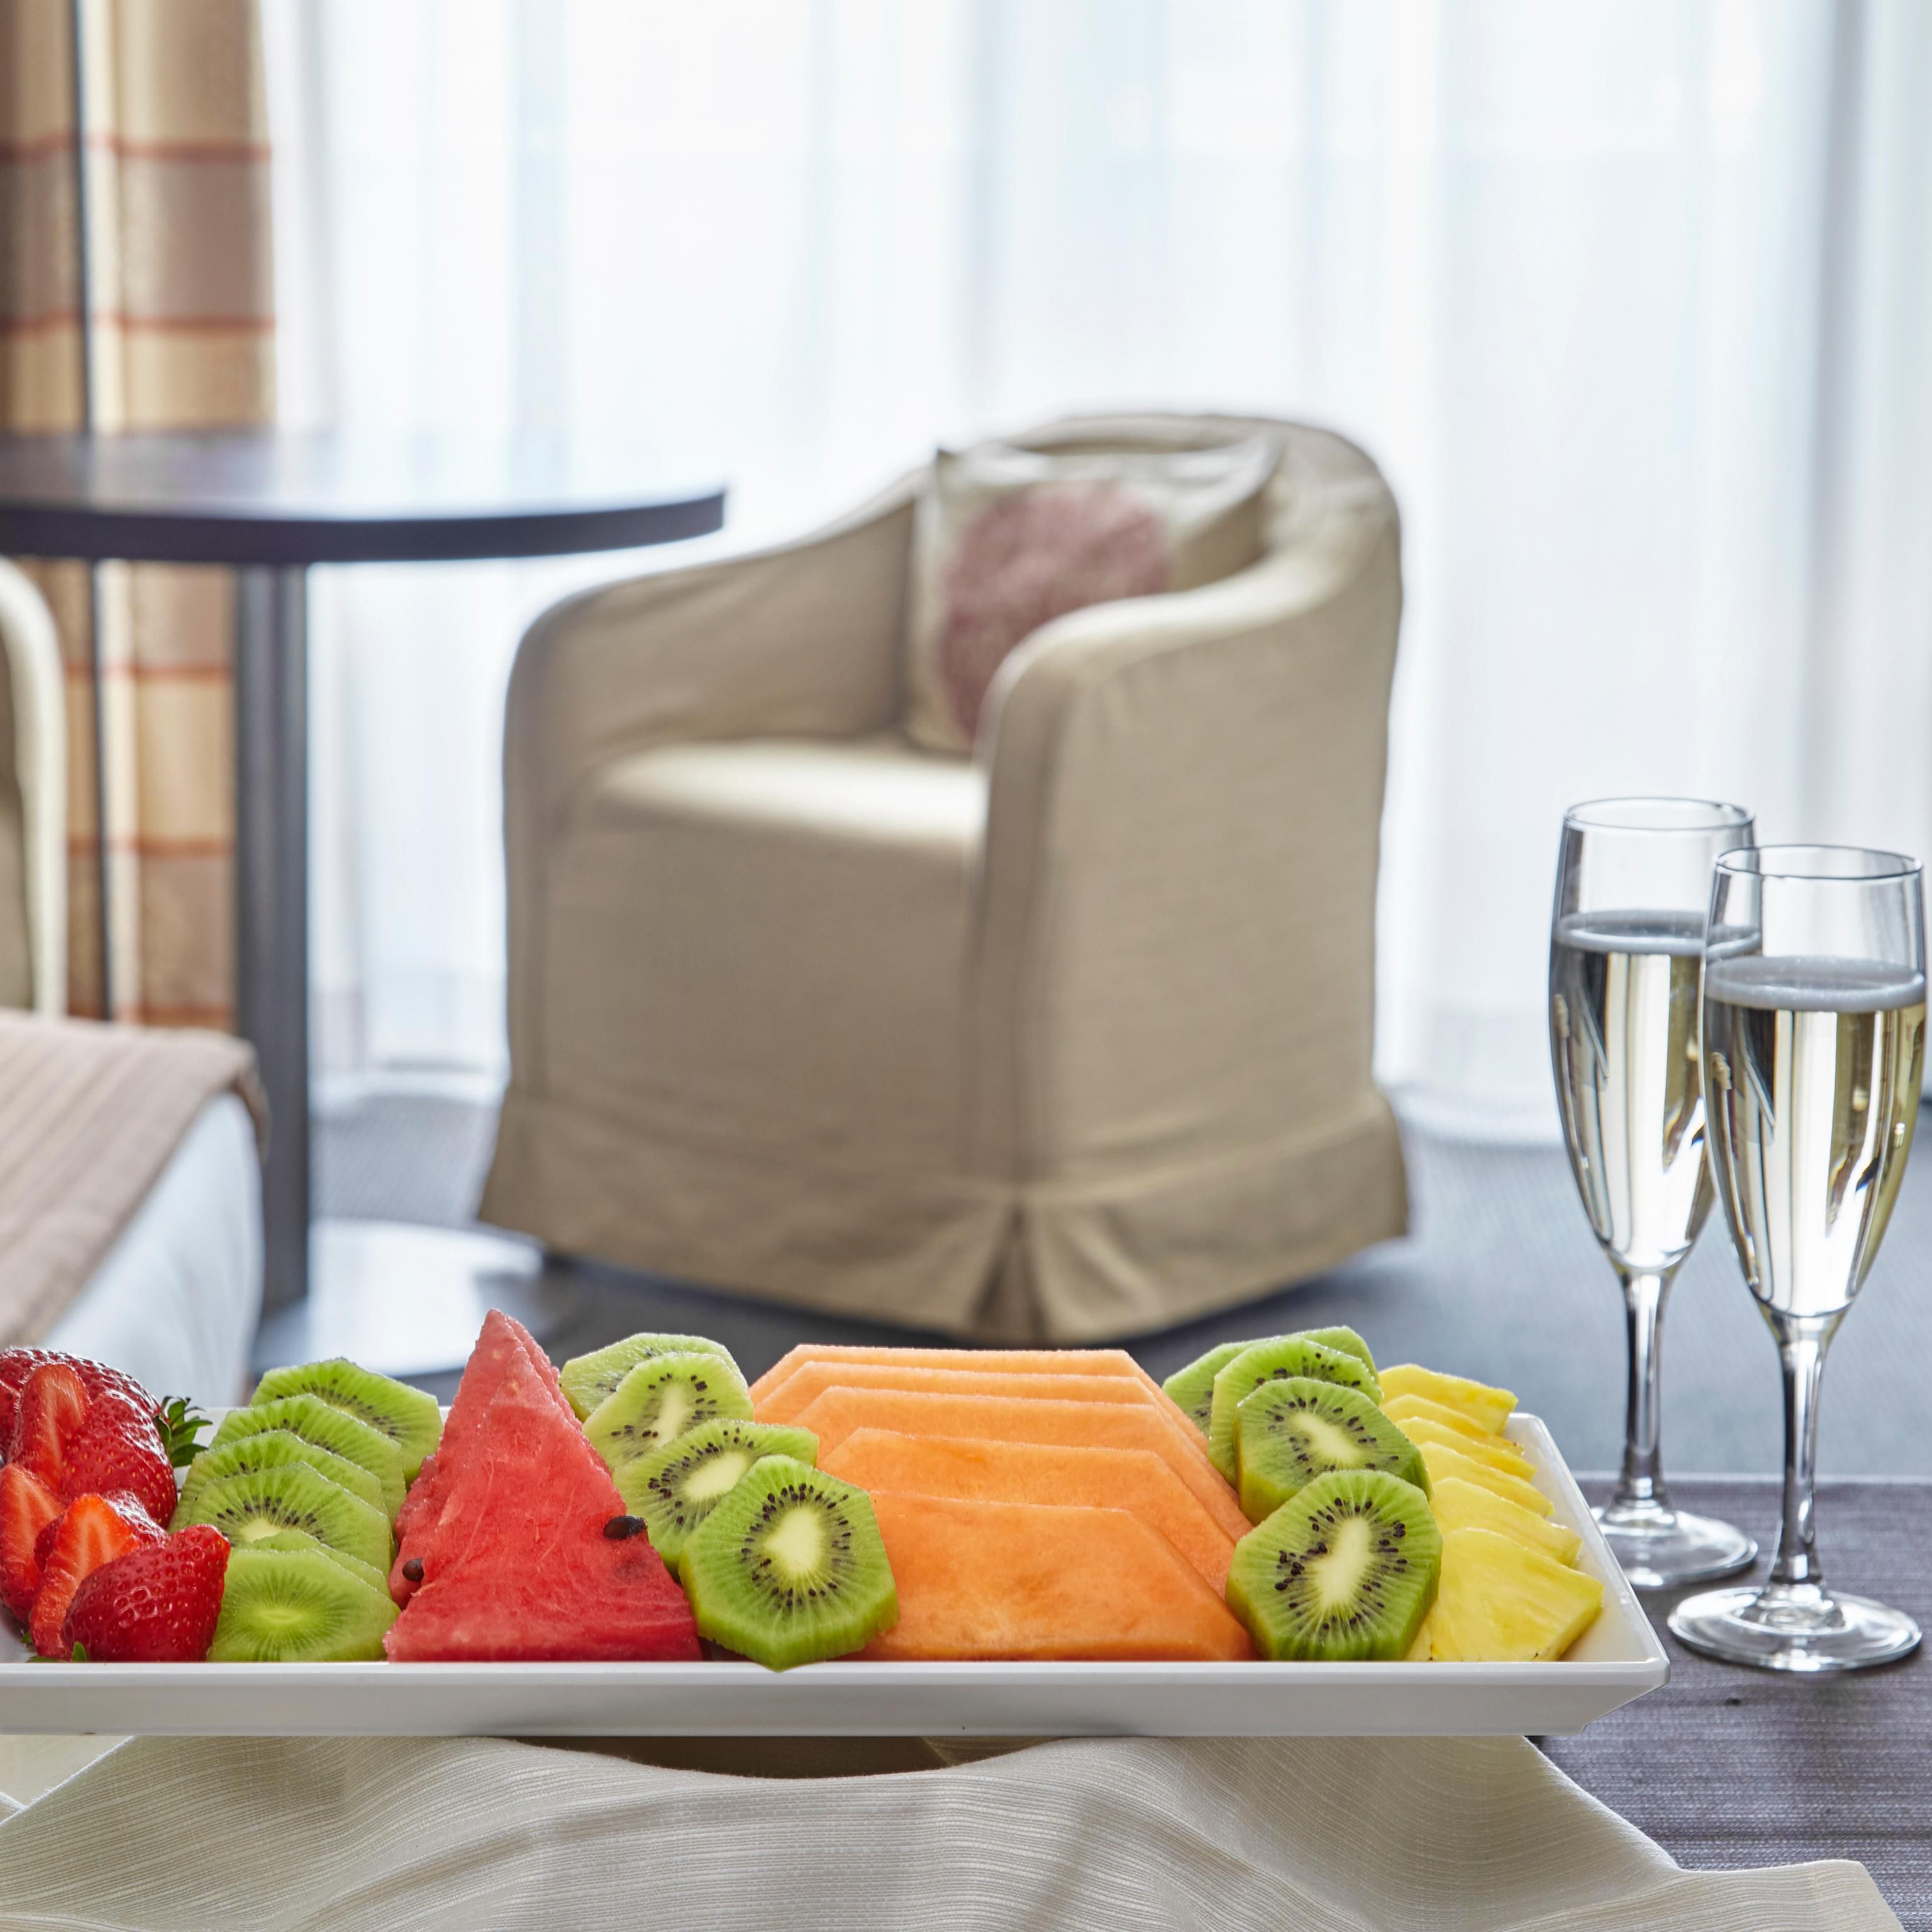 Enjoy our room service by sitting in our comfy rooms